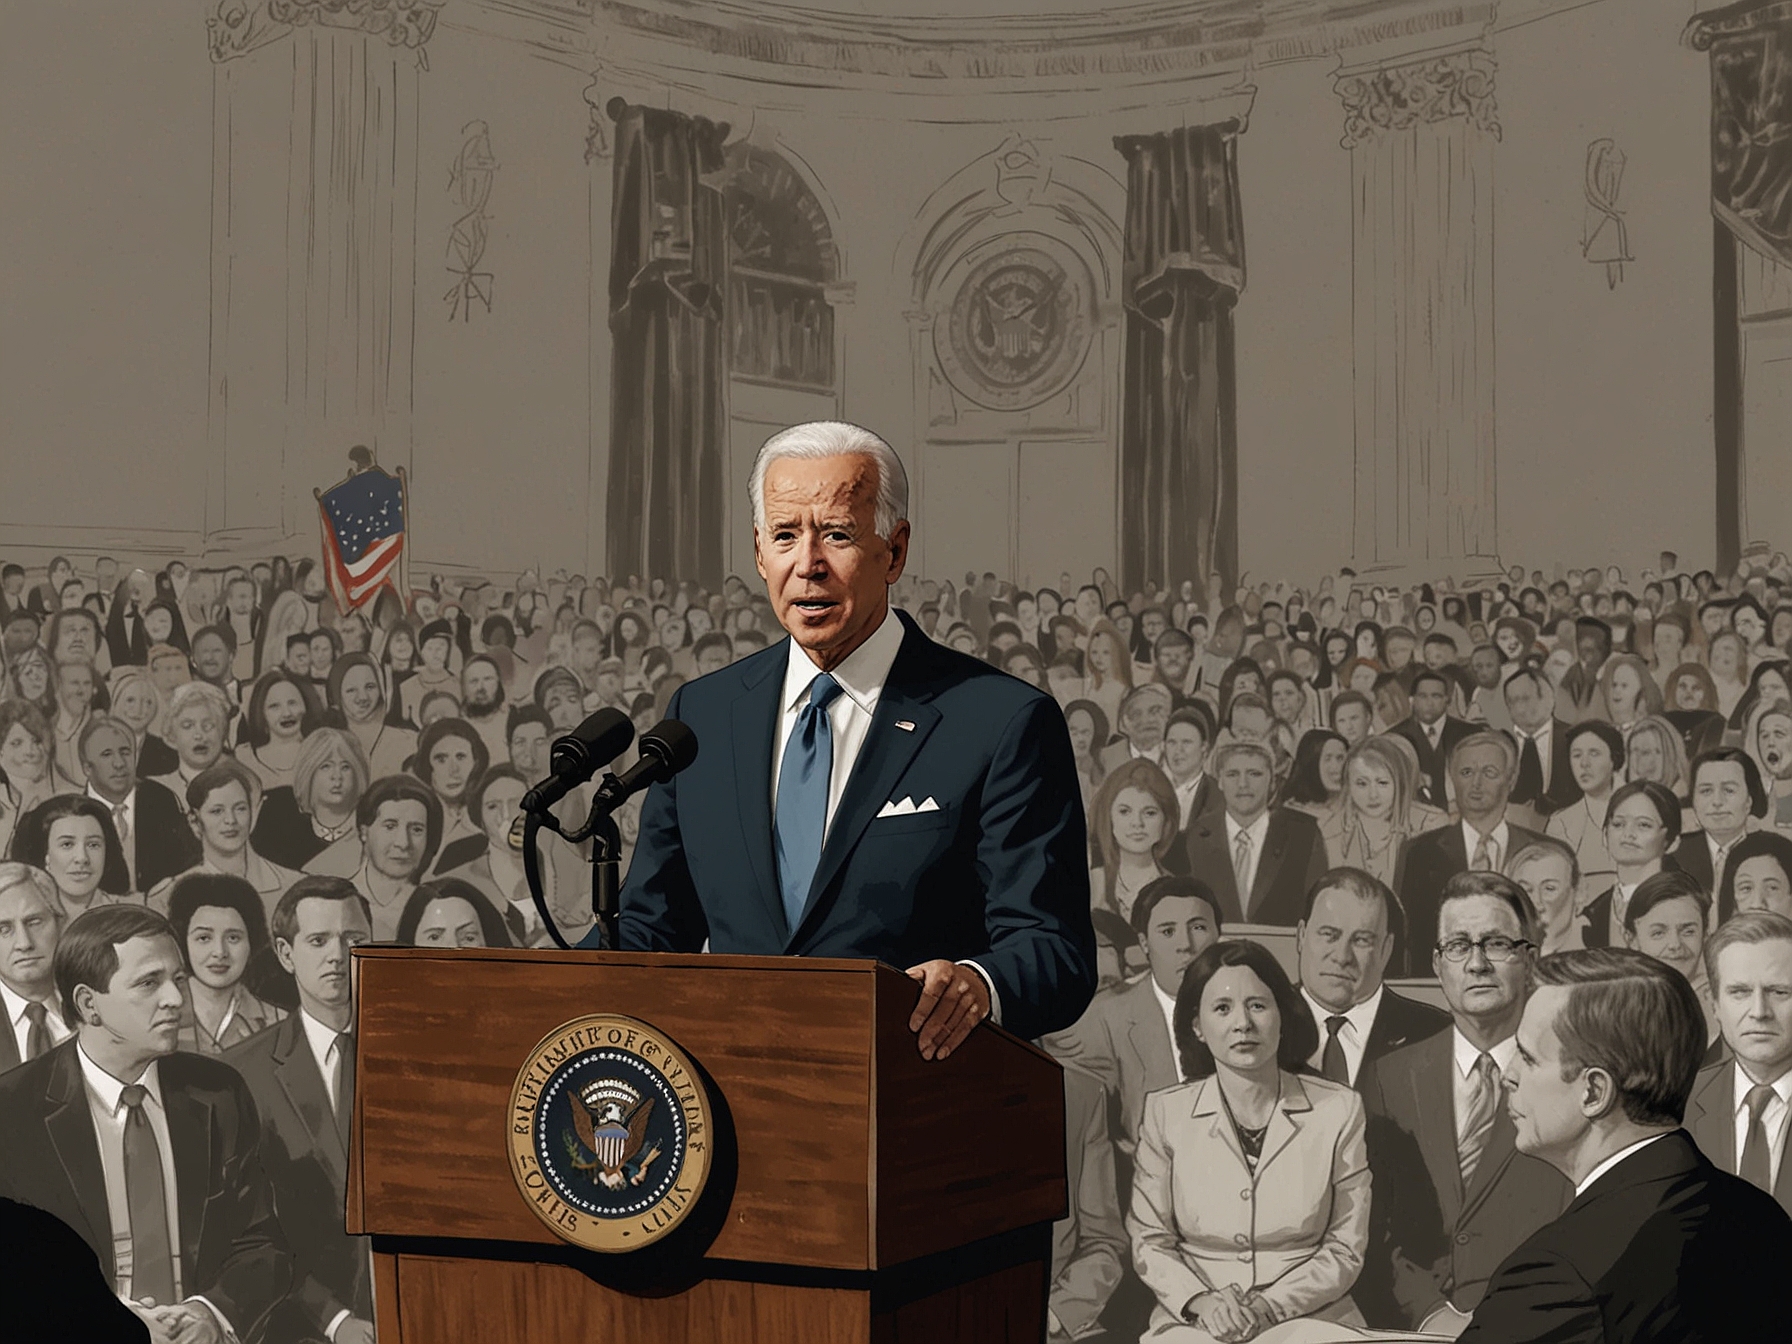 Illustration of President Joe Biden speaking at a podium, with an emphasis on immigration reform and family unity as part of his new policy to protect undocumented spouses of U.S. citizens.